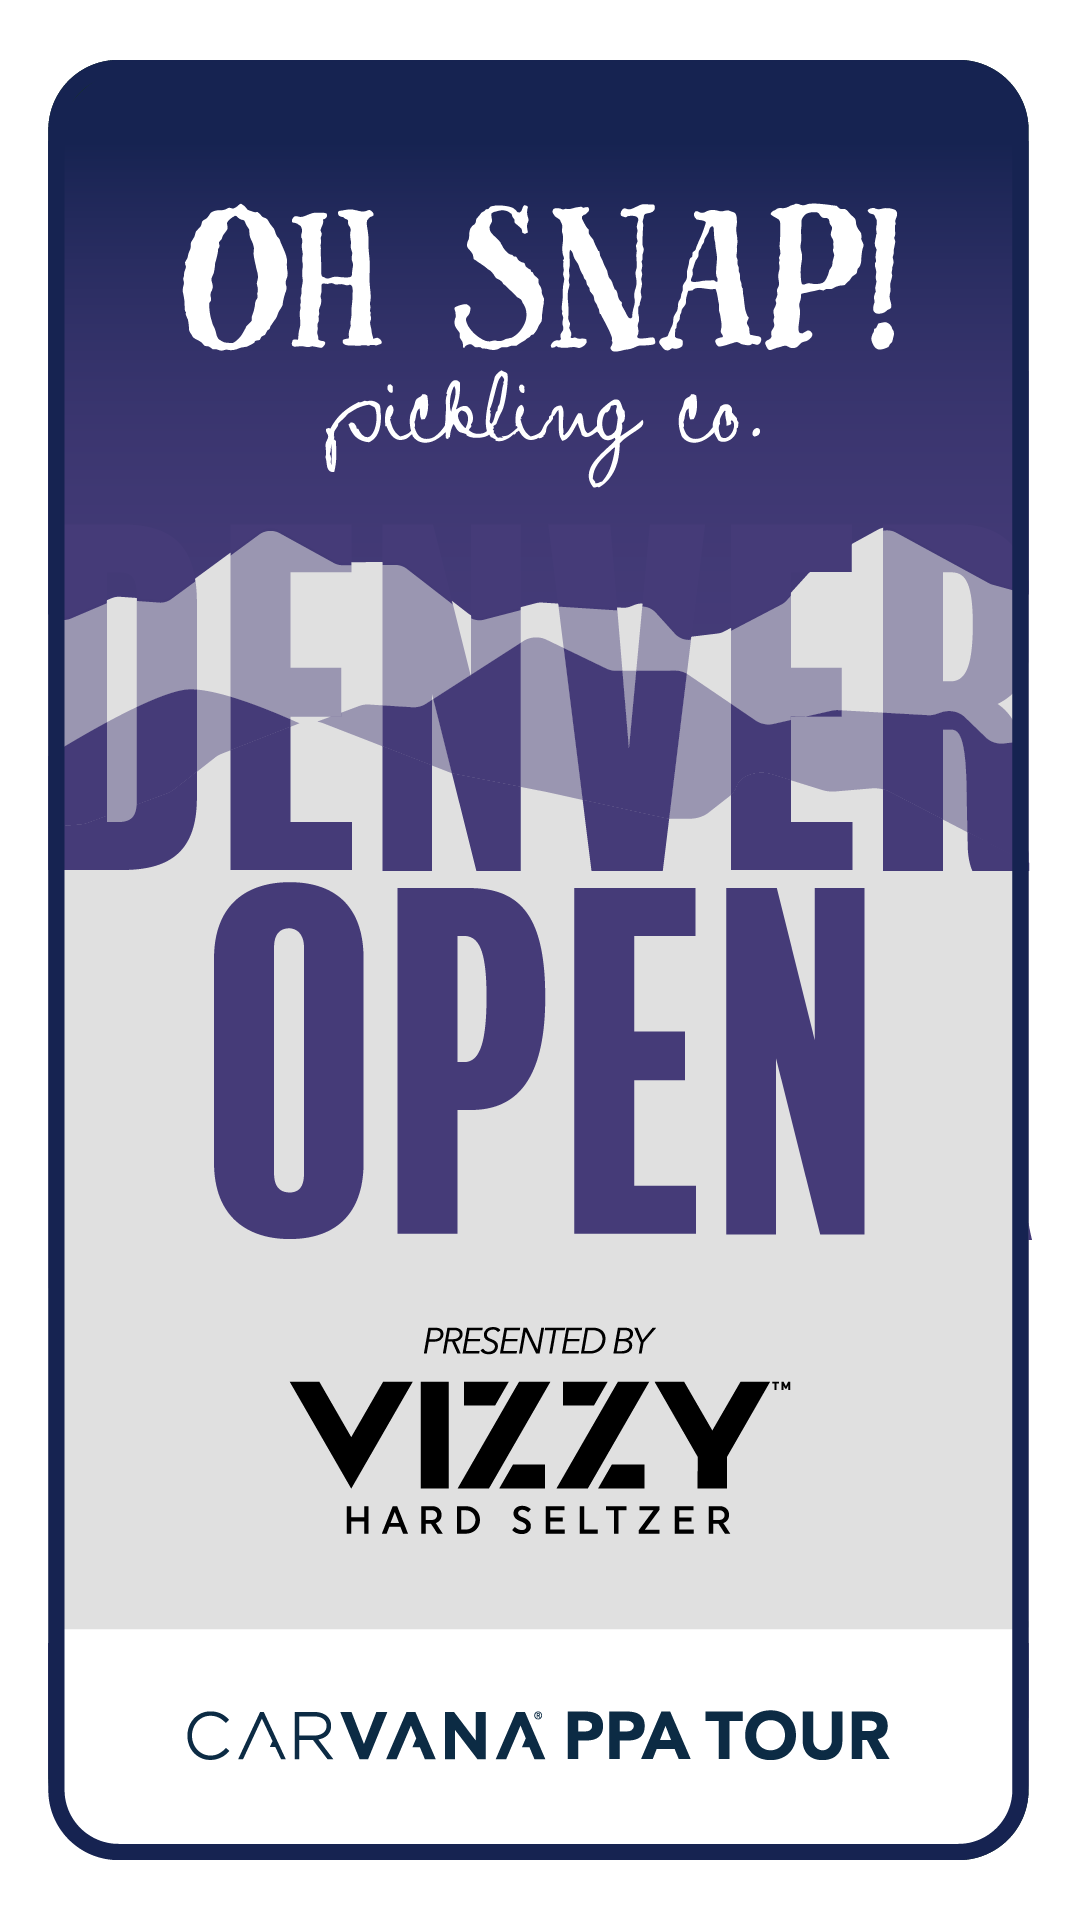 Carvana PPA Tour OH SNAP! Denver Open Presented by Vizzy Tournament Logo PNG